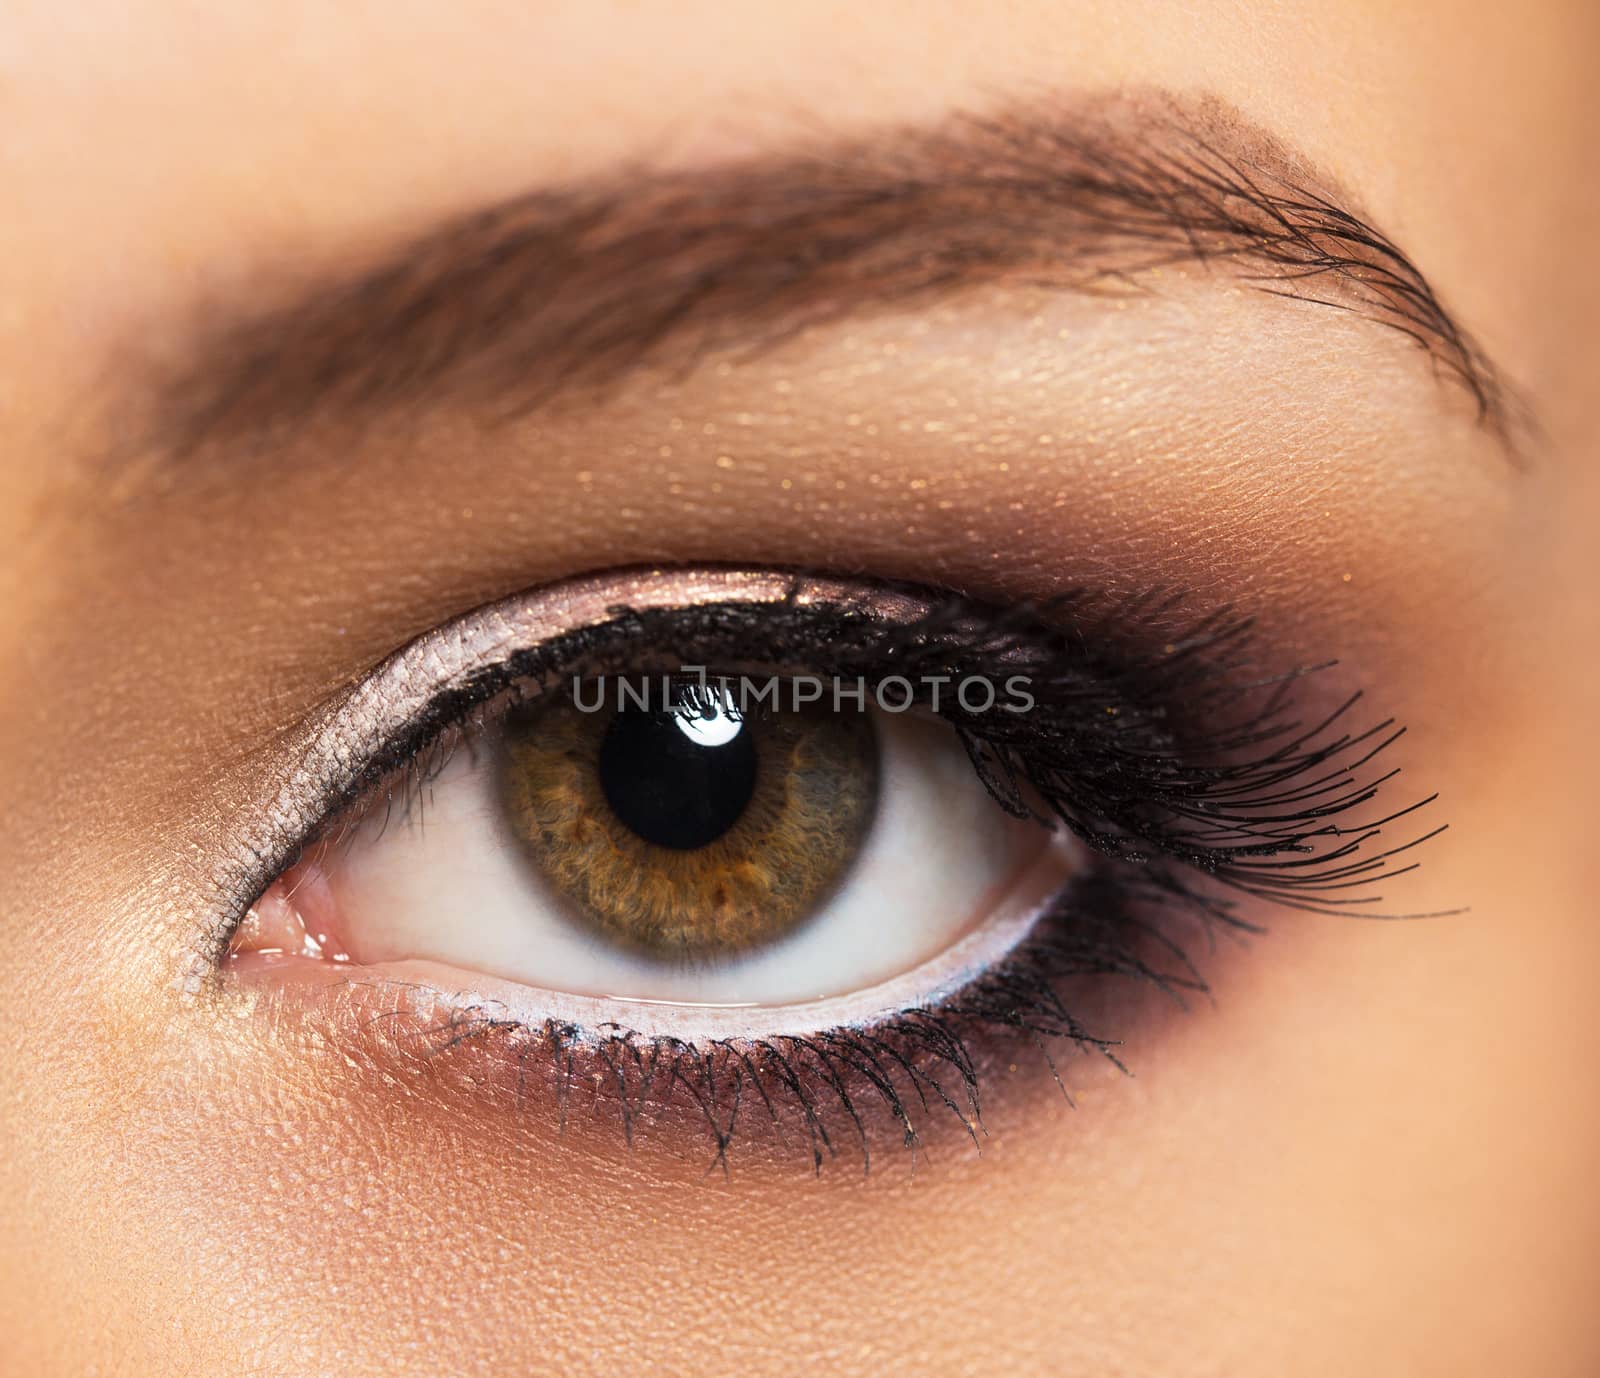 Closeup of beautiful eye with glamorous makeup by vlad_star